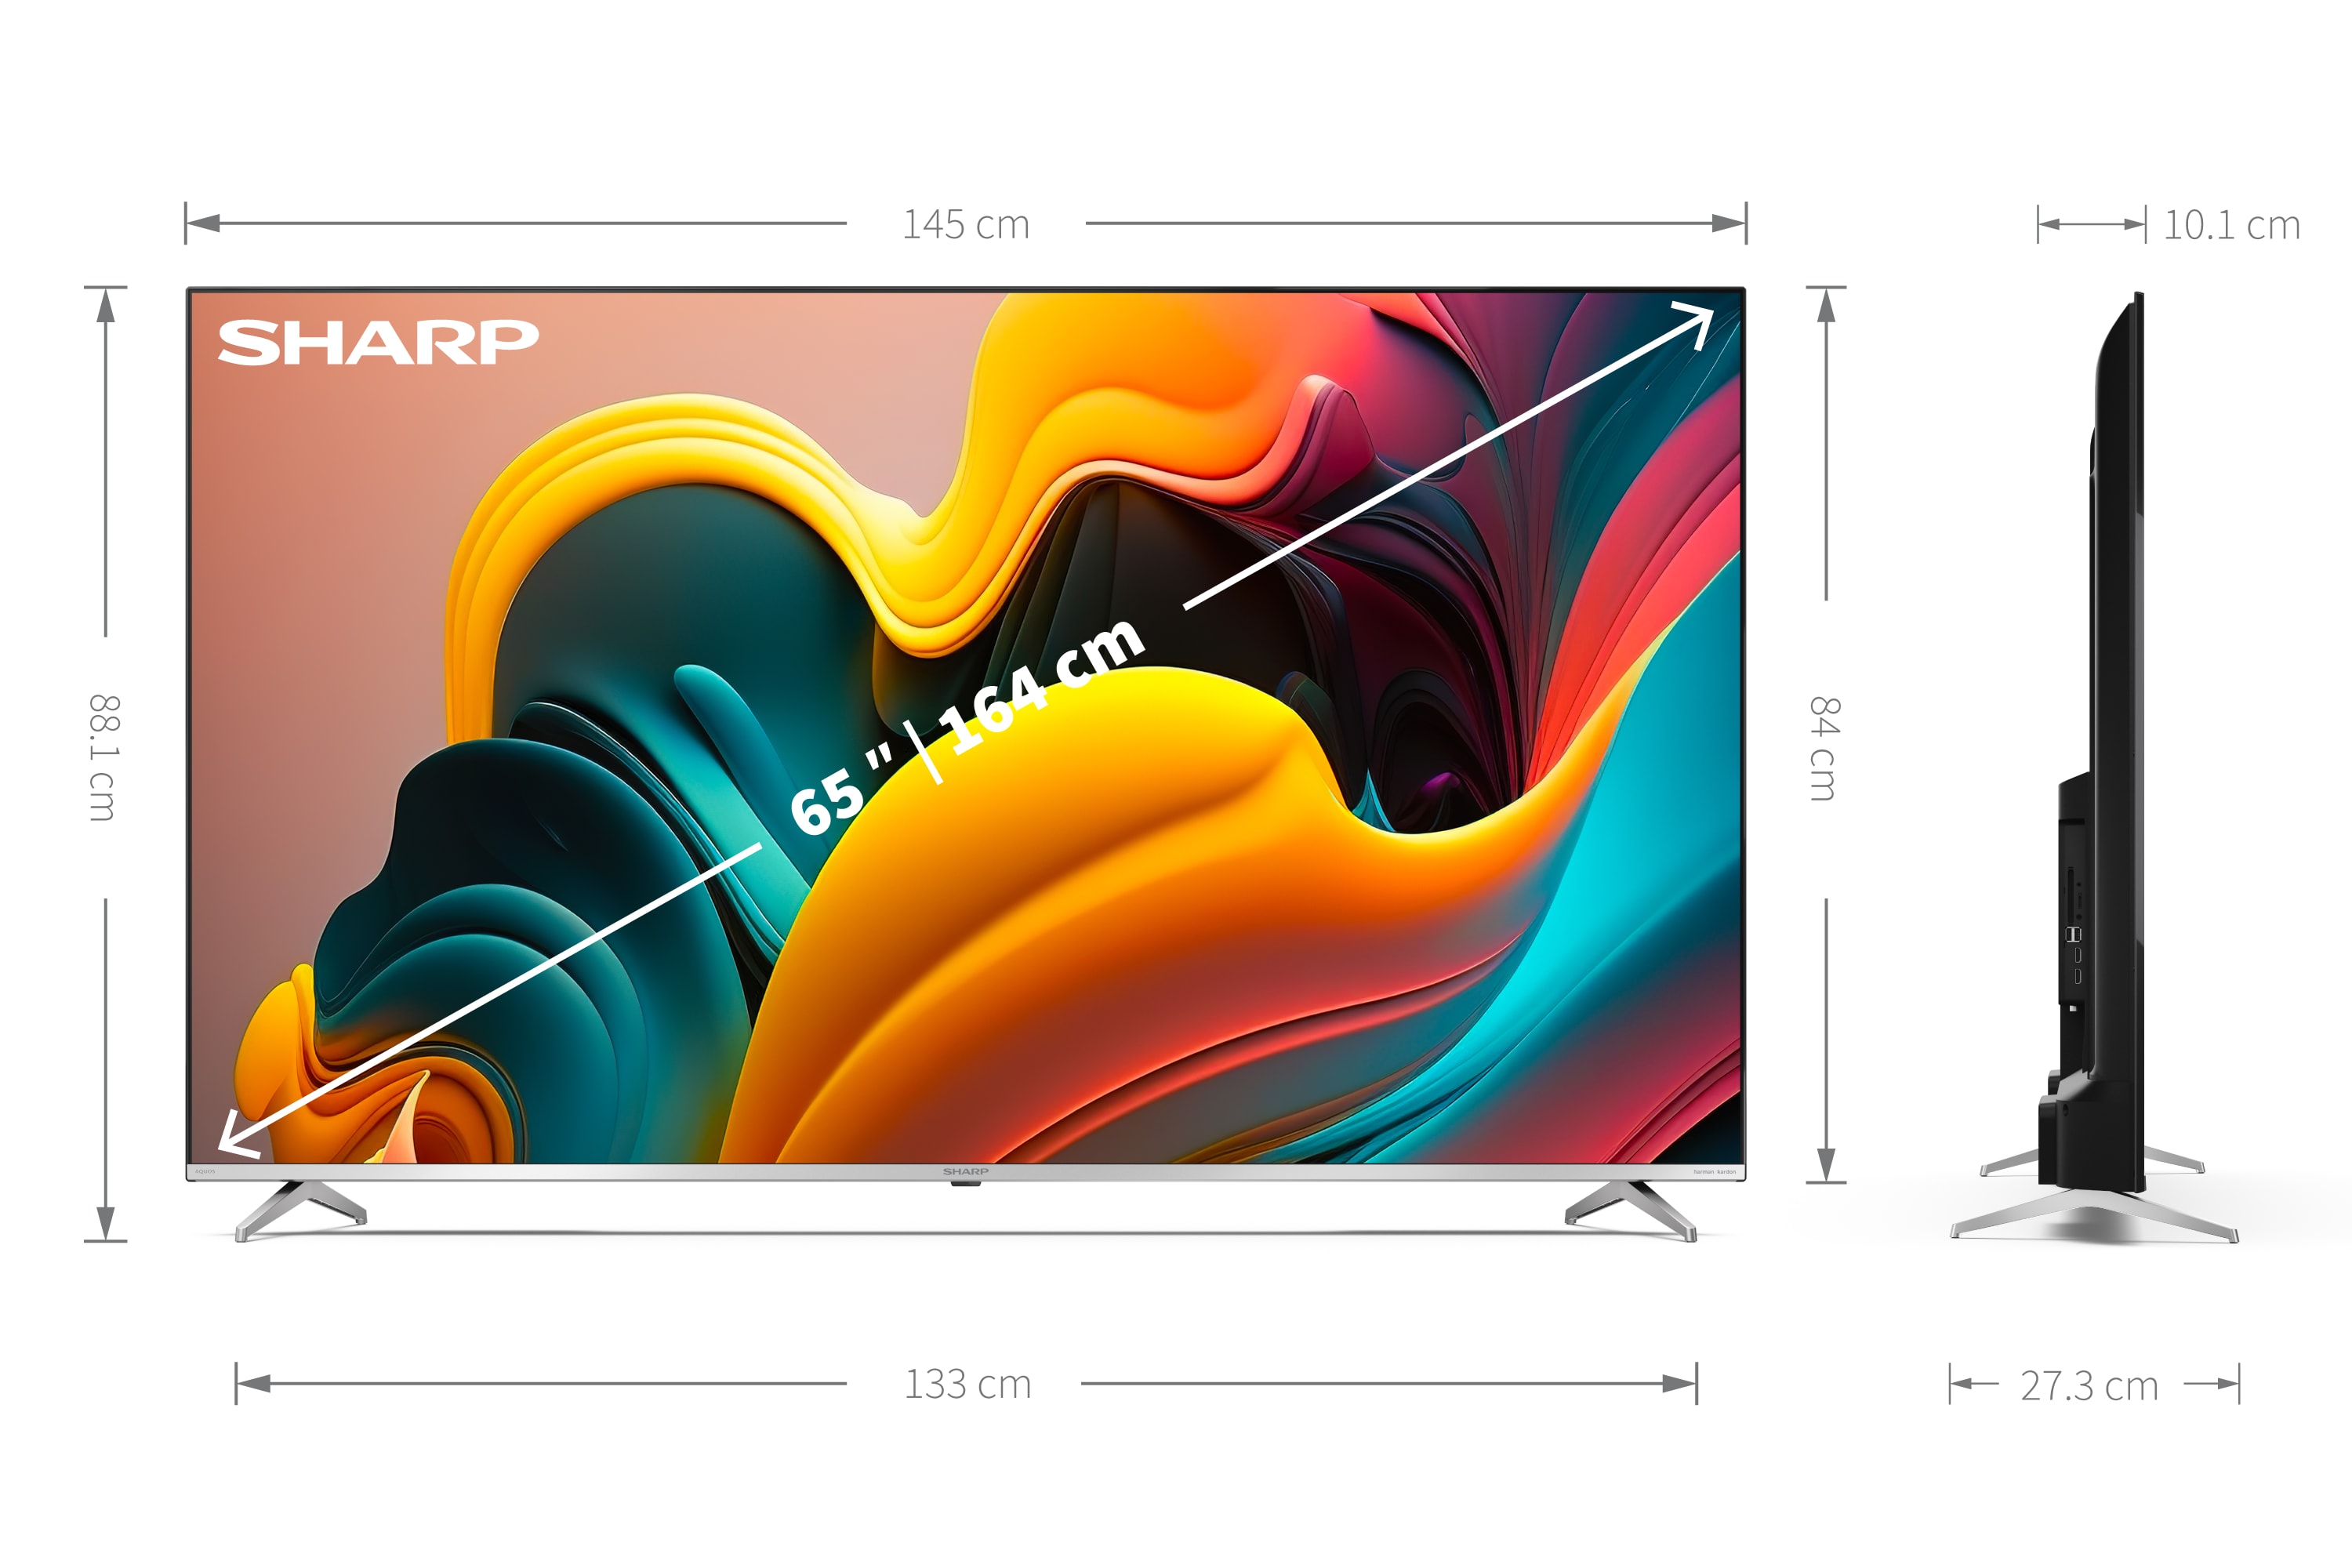 Android TV 4K UHD - 65" 4K ULTRA HD QUANTUM DOT SHARP ANDROID TV™